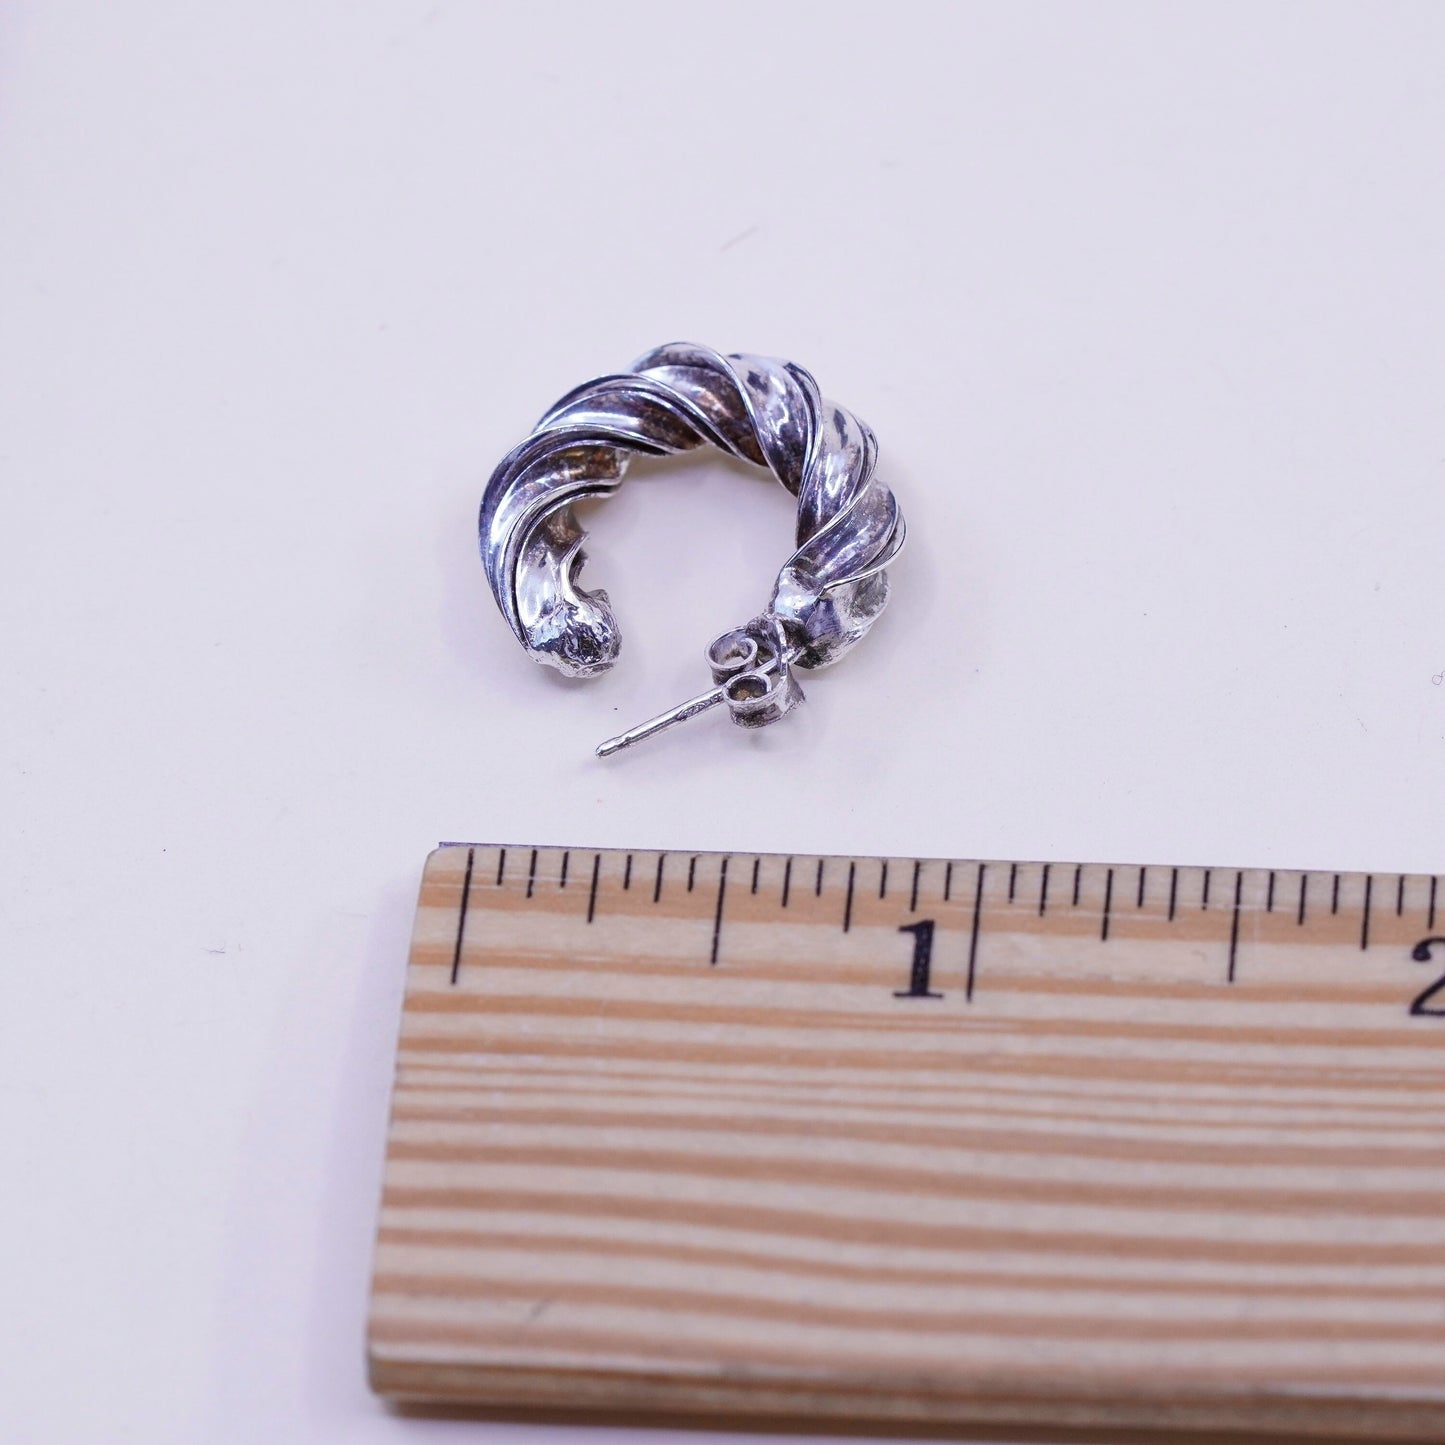 0.75”, Italy sterling silver huggie earrings, entwined twisted primitive hoops